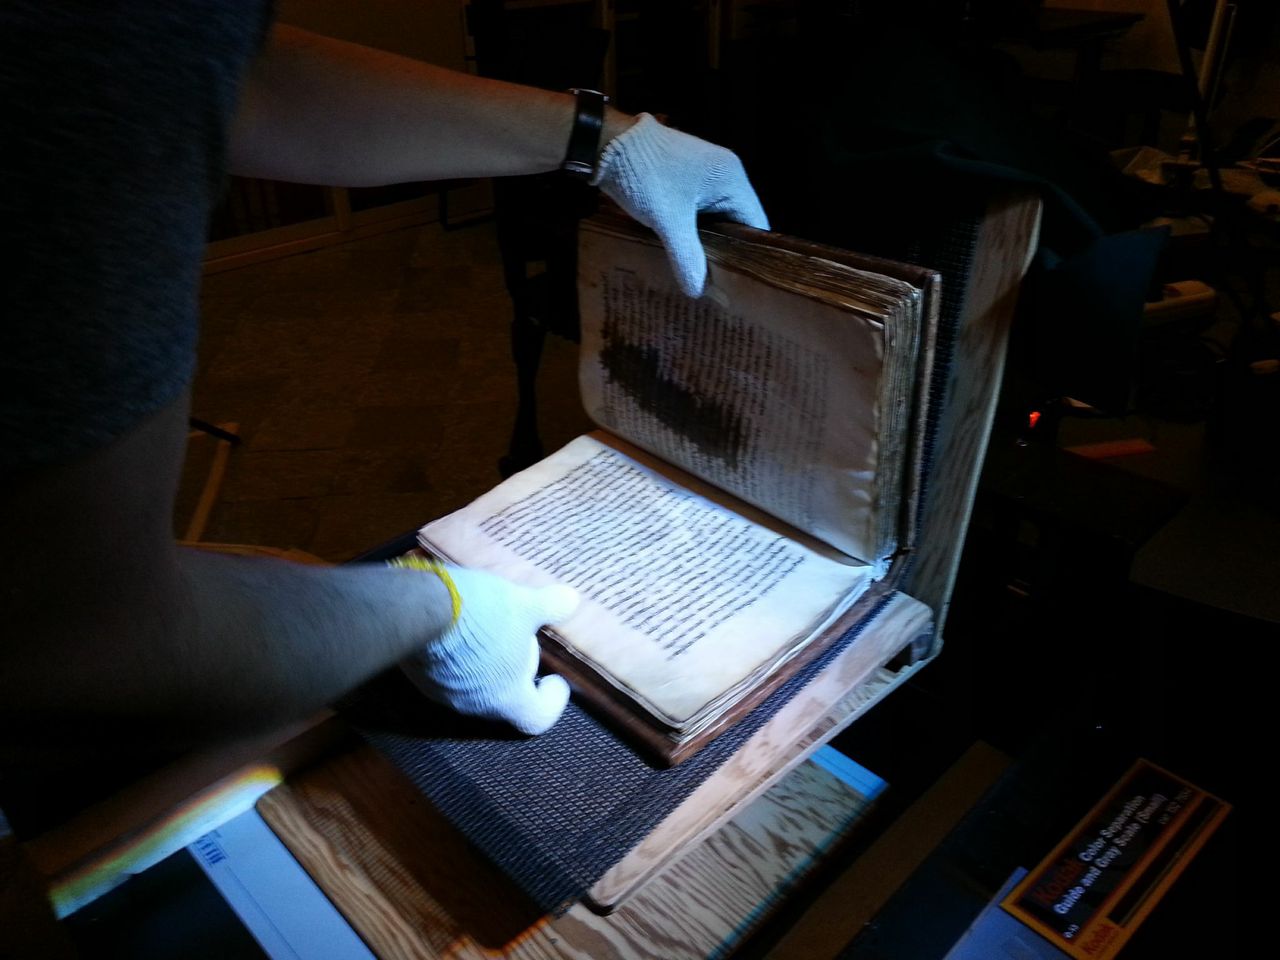 CAUTIONARY MEASURES: The manuscripts and codexes require careful handling. (University photo / J. Adam Fenster)